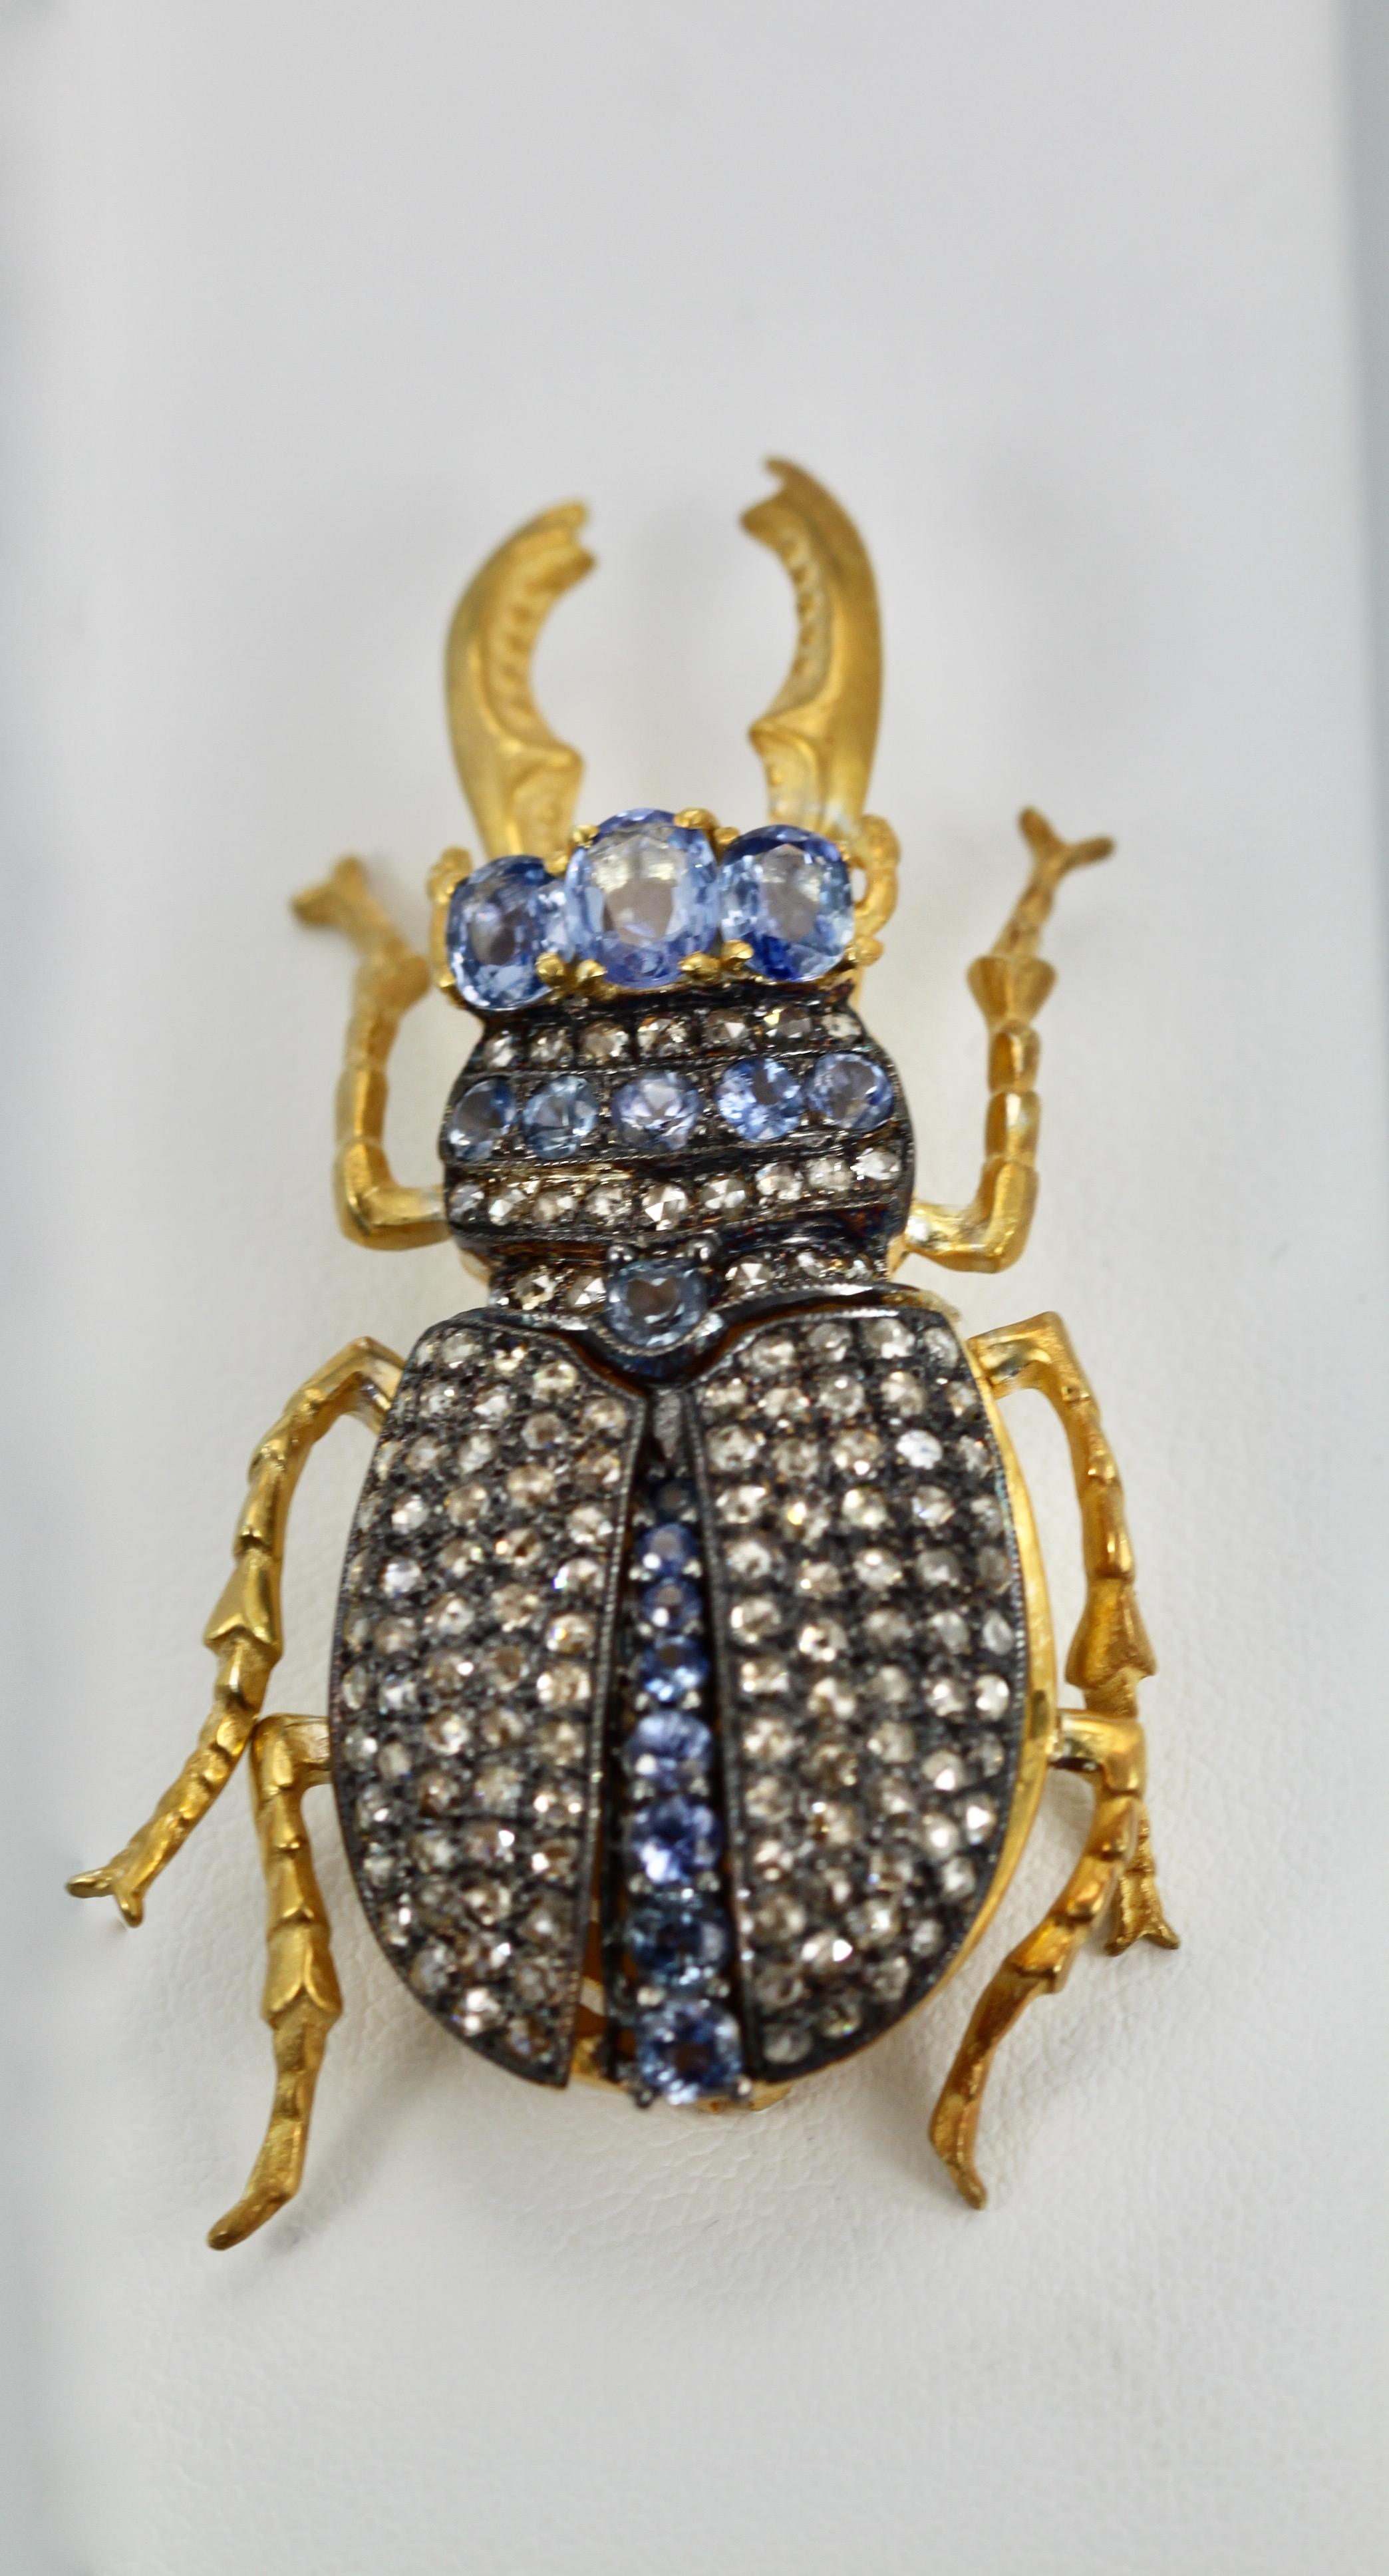 This lovely vintage Scarab Pendant Brooch has 3 large Sapphire stones form the head (approx. 0.40 each.
There are also 5 Sapphires form the throat and a row of Diamonds and Sapphire neck, center body is Sapphires, the body of this beetle opens up